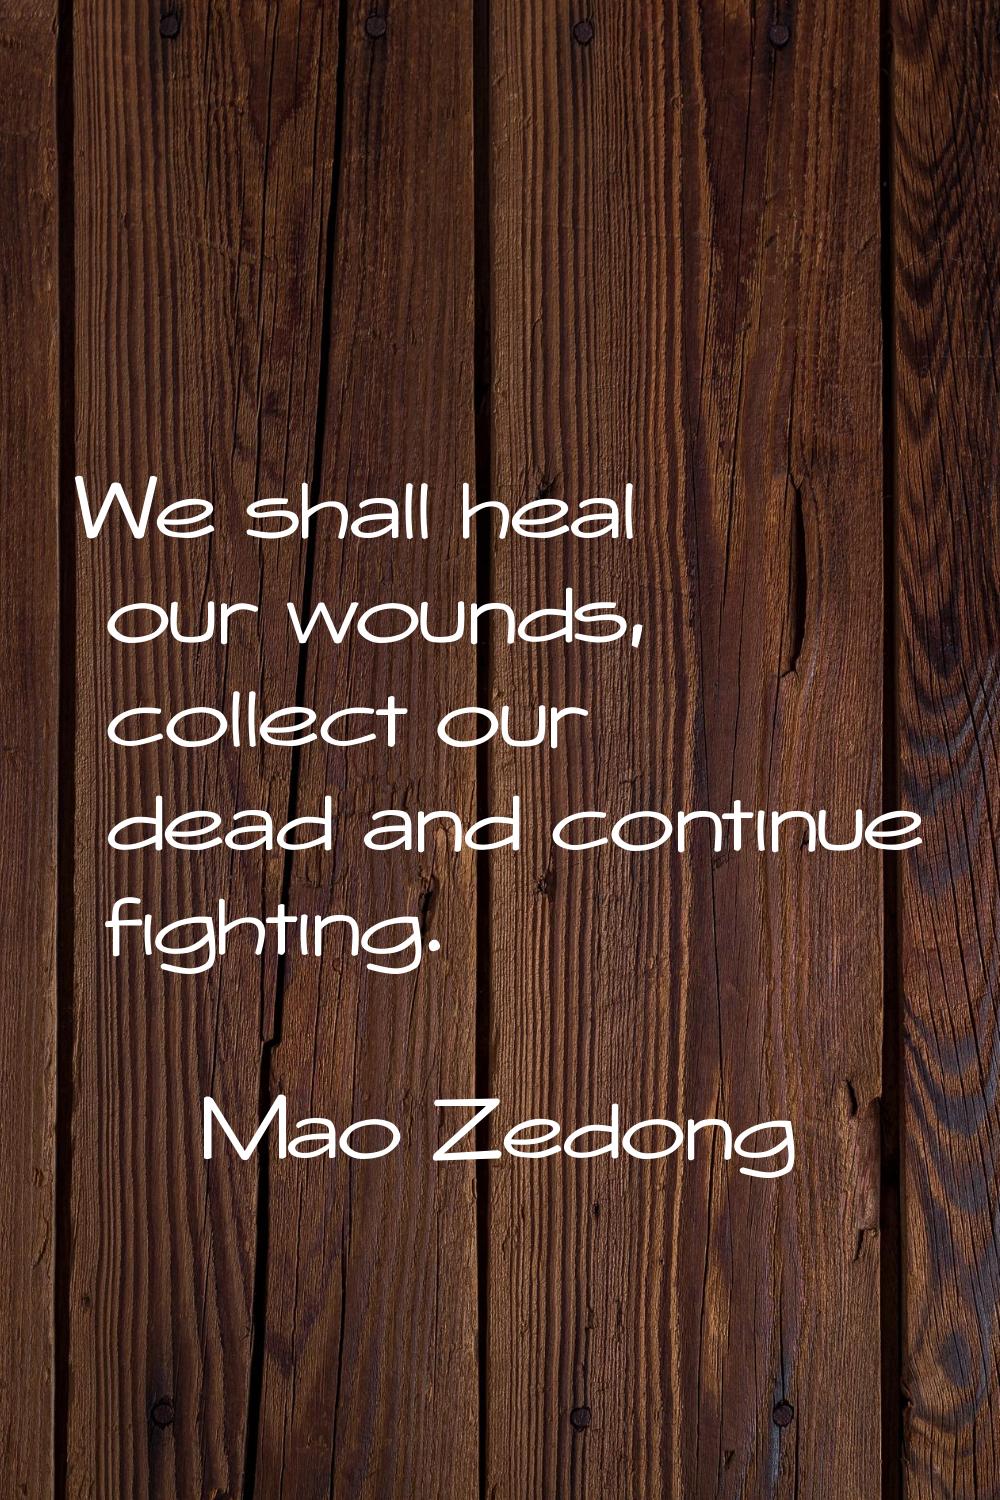 We shall heal our wounds, collect our dead and continue fighting.